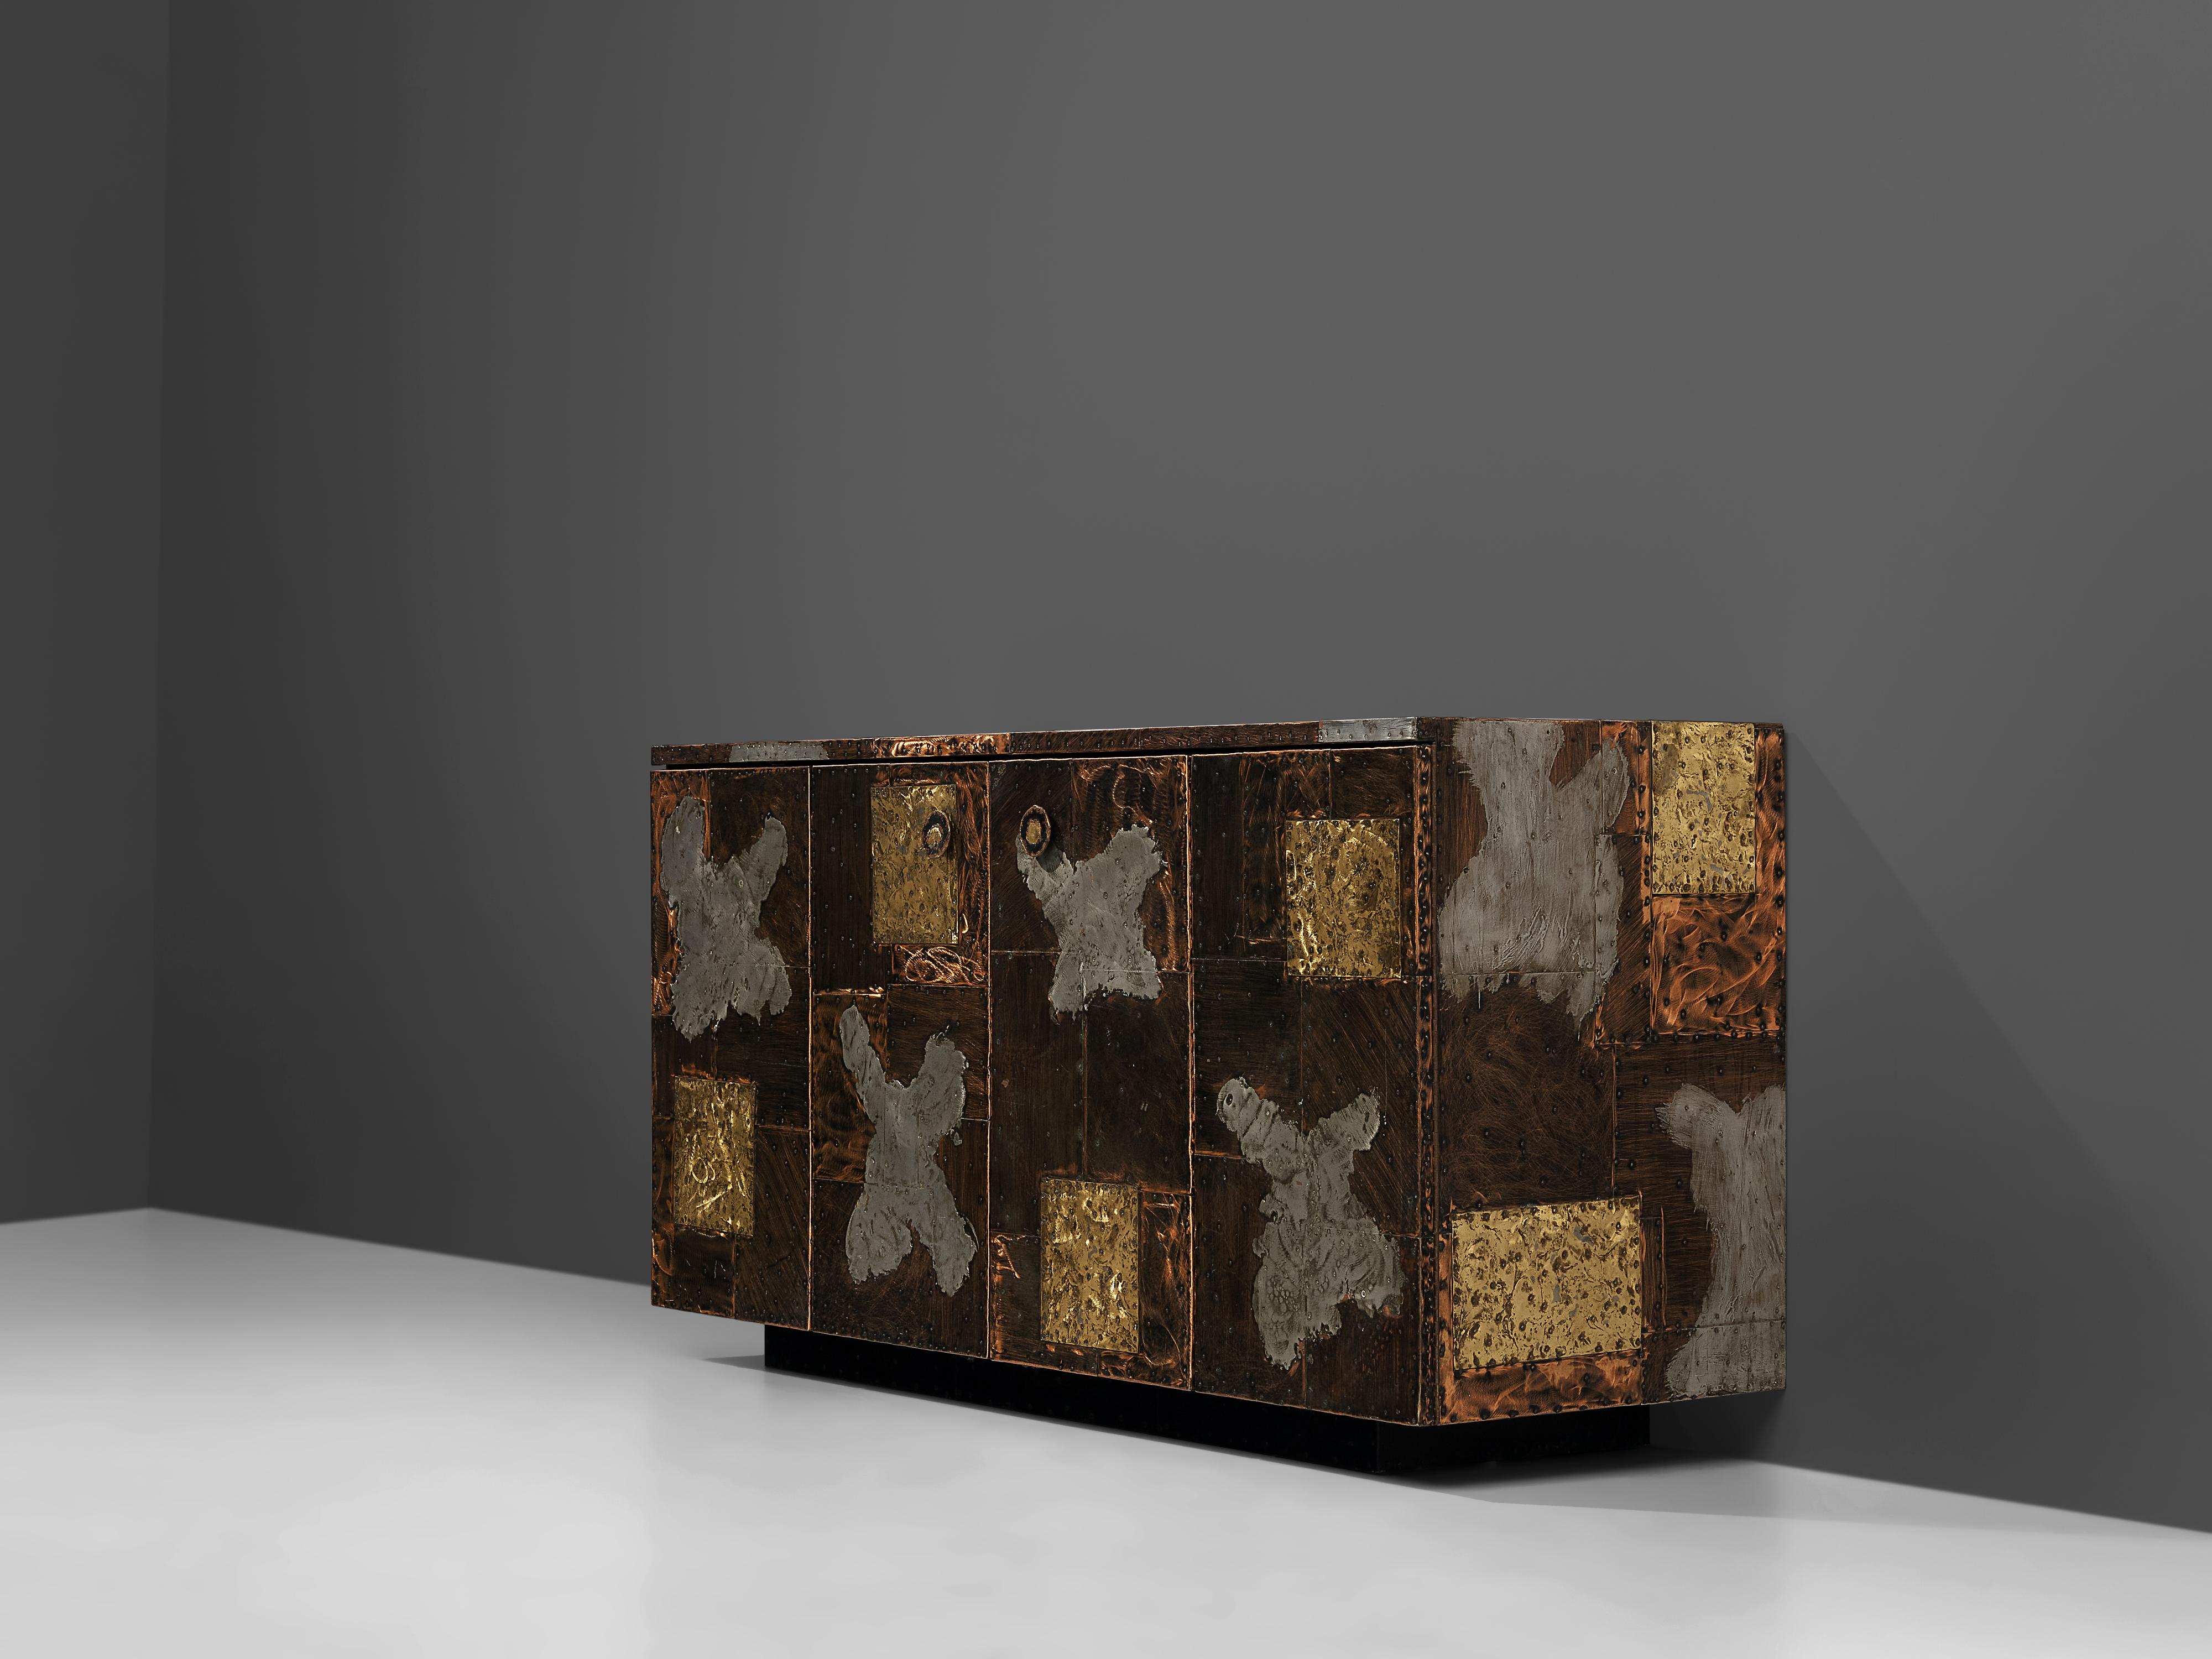 American Iconic Paul Evans for Directional 'Patchwork' Sideboard